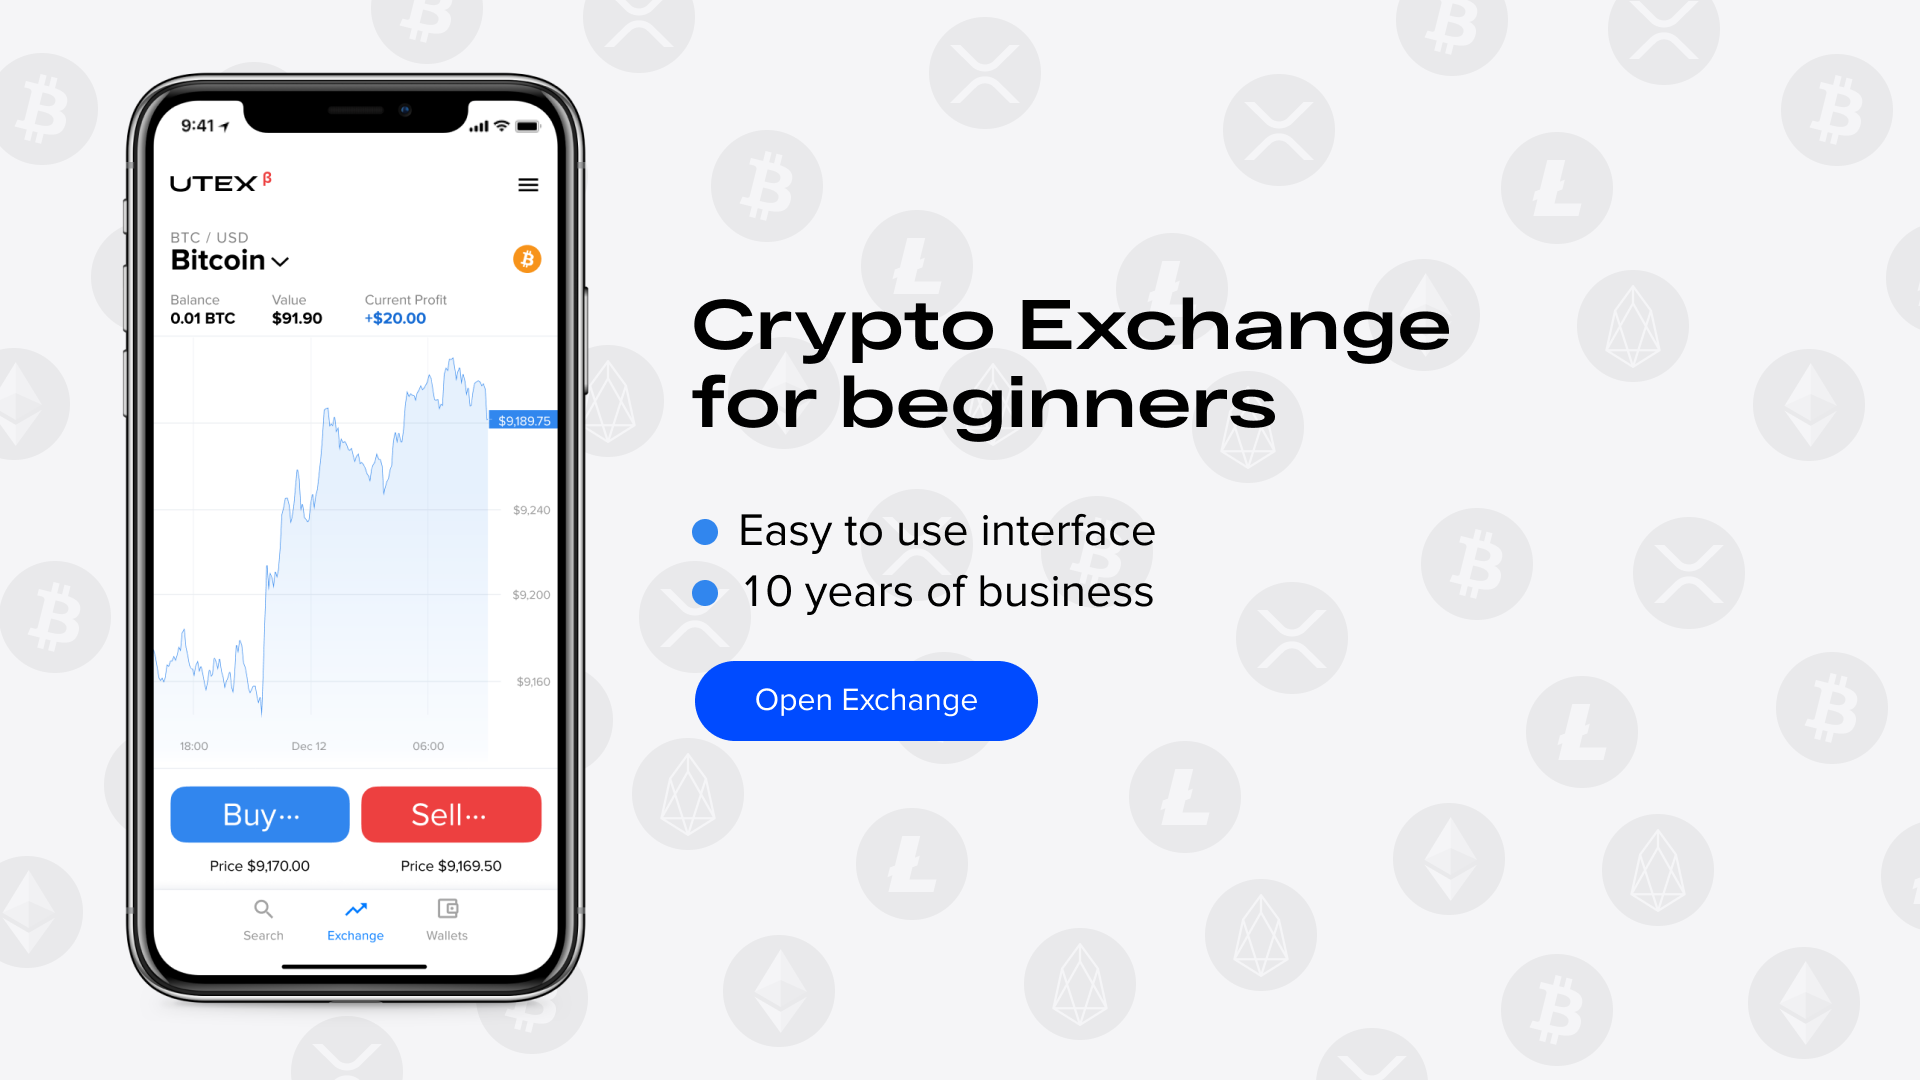 Crypto Exchange for beginners